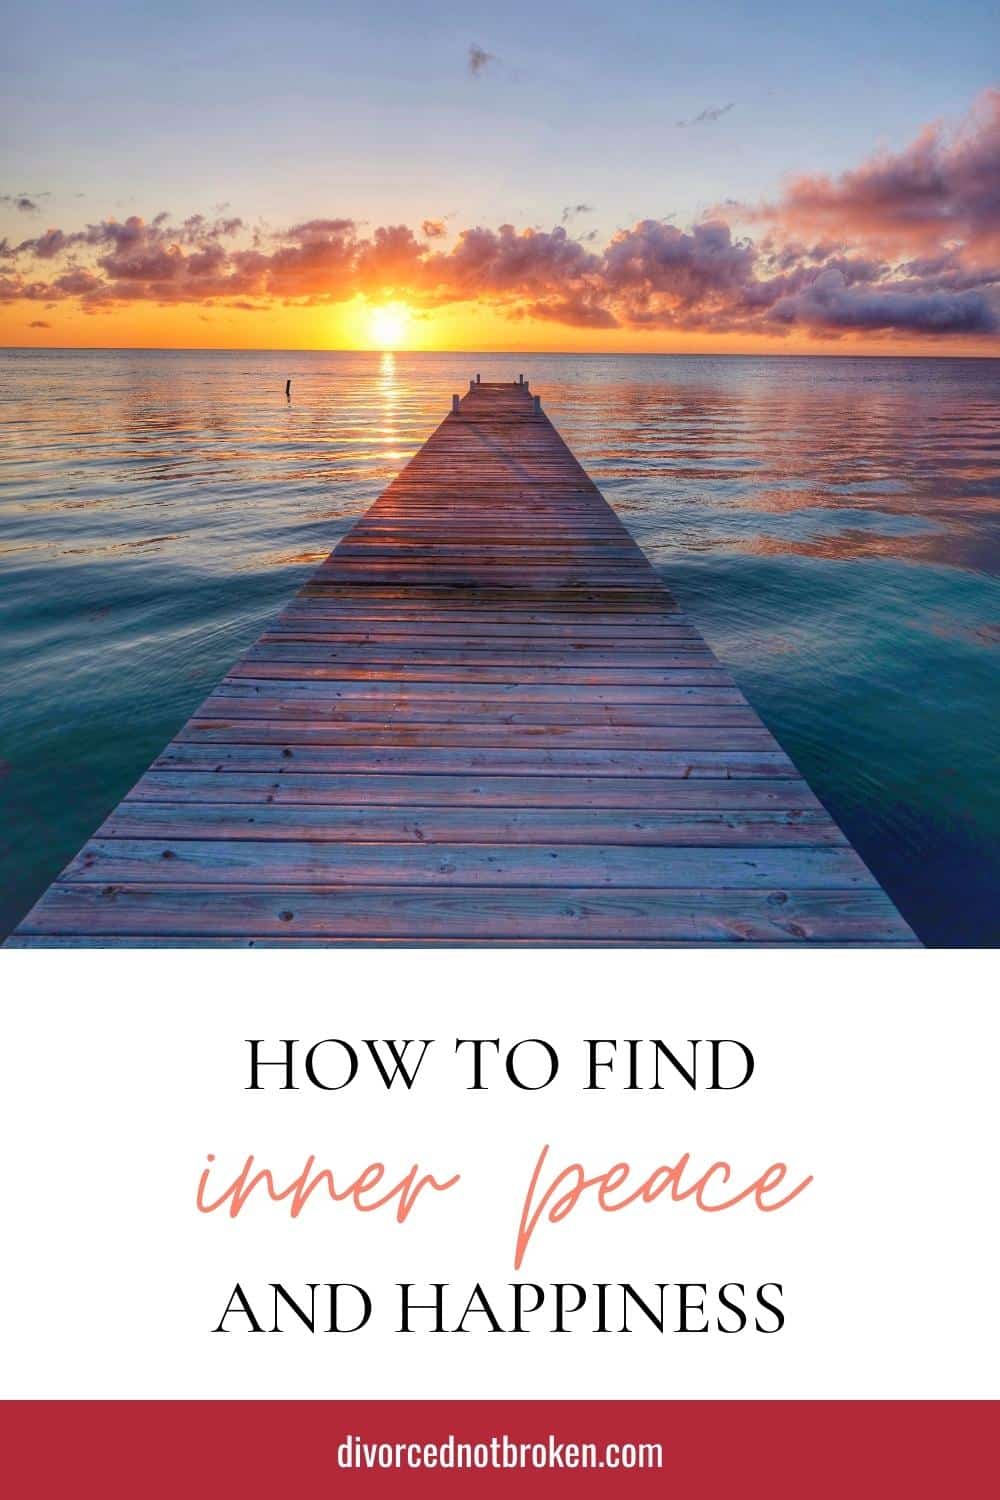 How to find inner peace and happiness title graphic with image of a dock on the water at sunset.